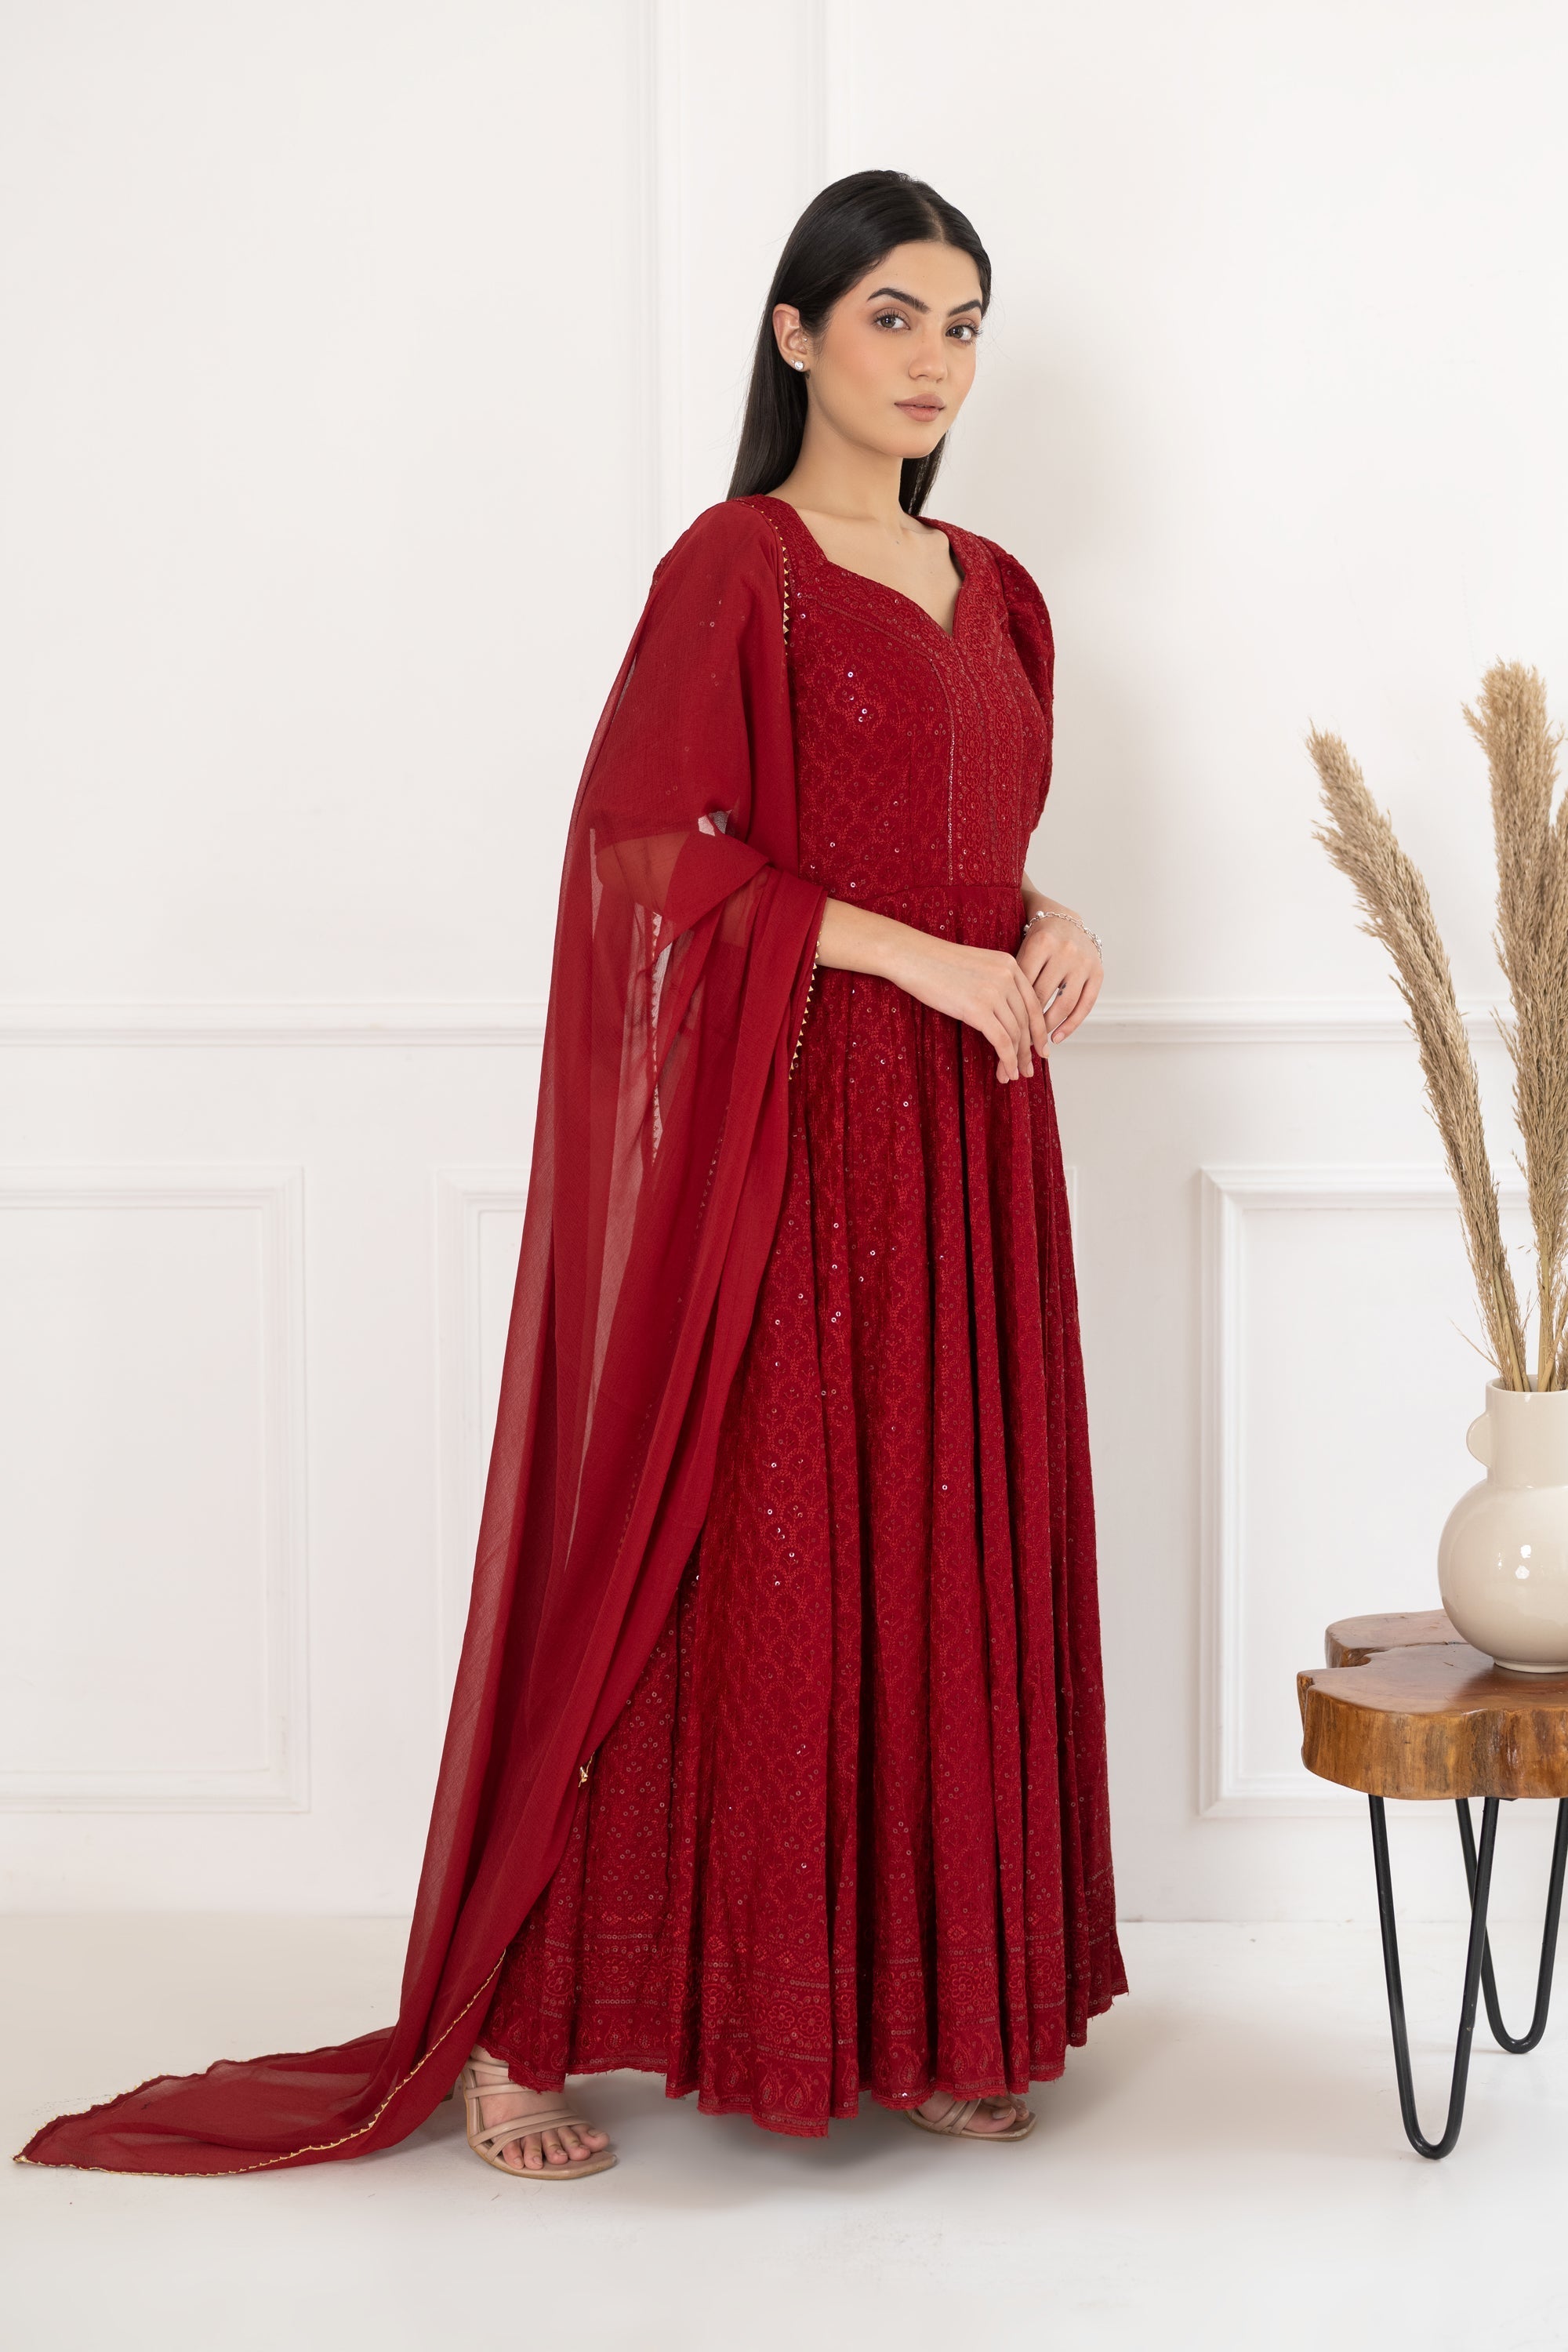 Women's Red Sequin Embroidered Dress With Dupatta (2 Pc Set)- Final Clearance Sale